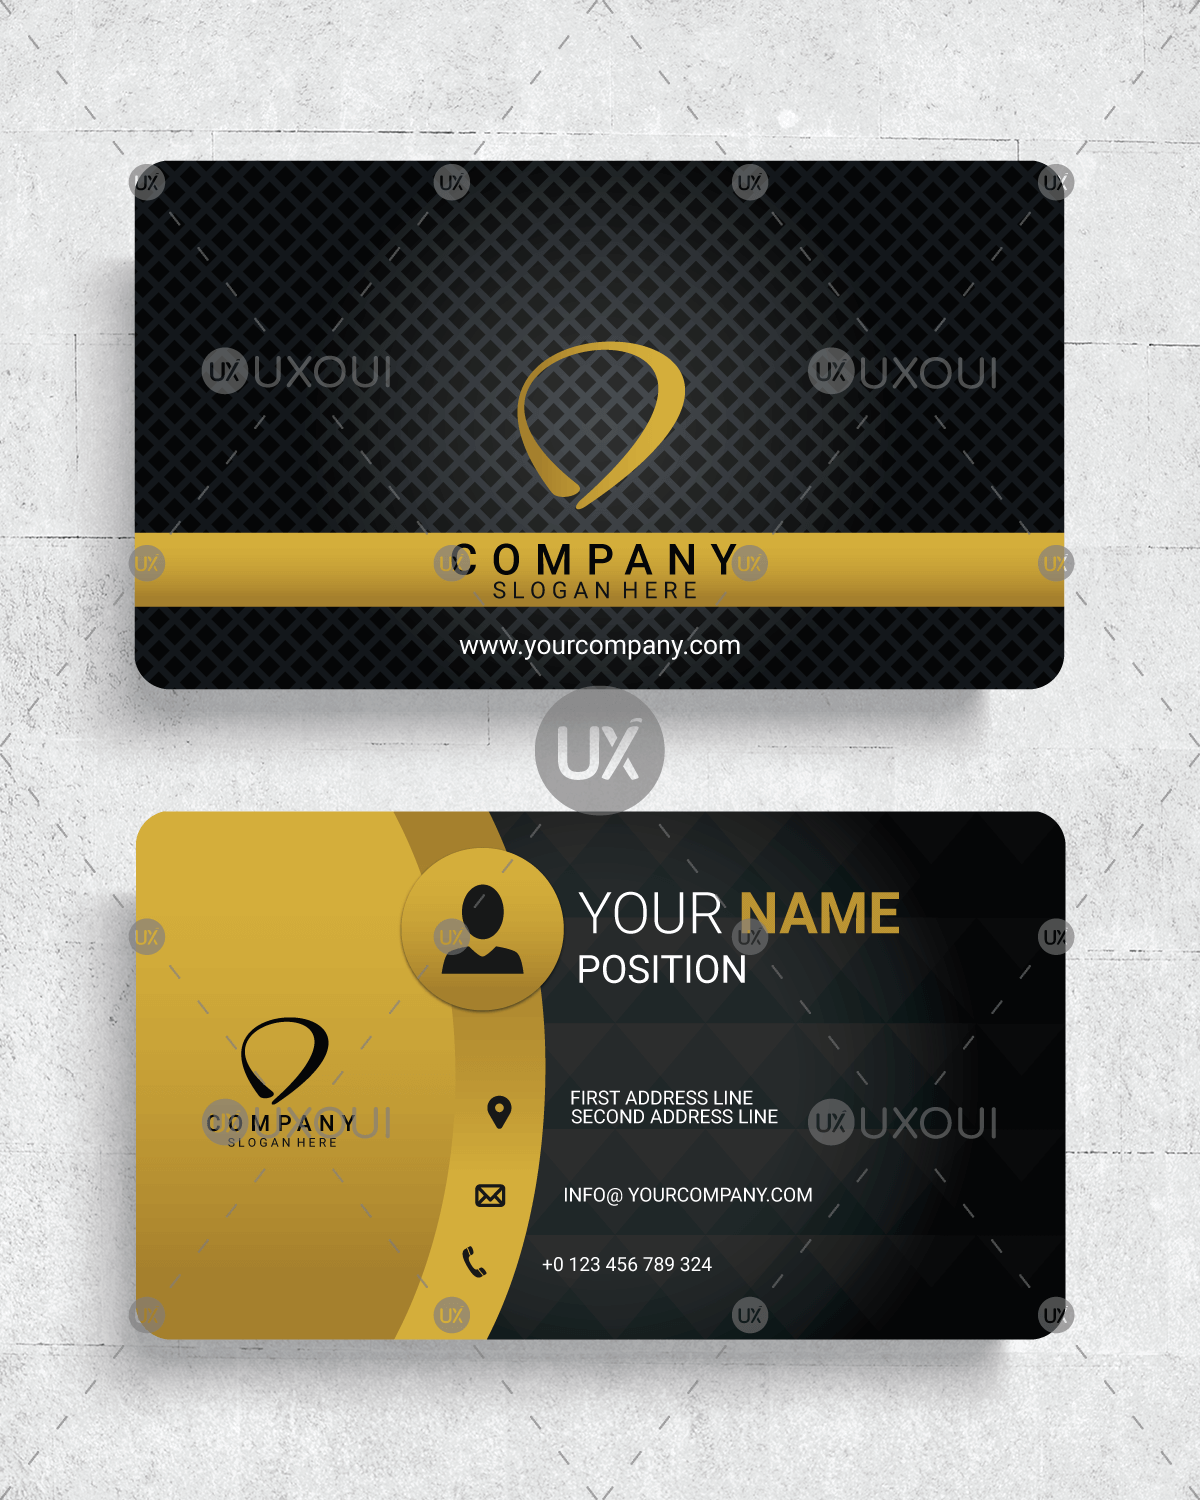 Black and Yellow Company Logo - Premium luxury Business Card Design Template vector with black ...